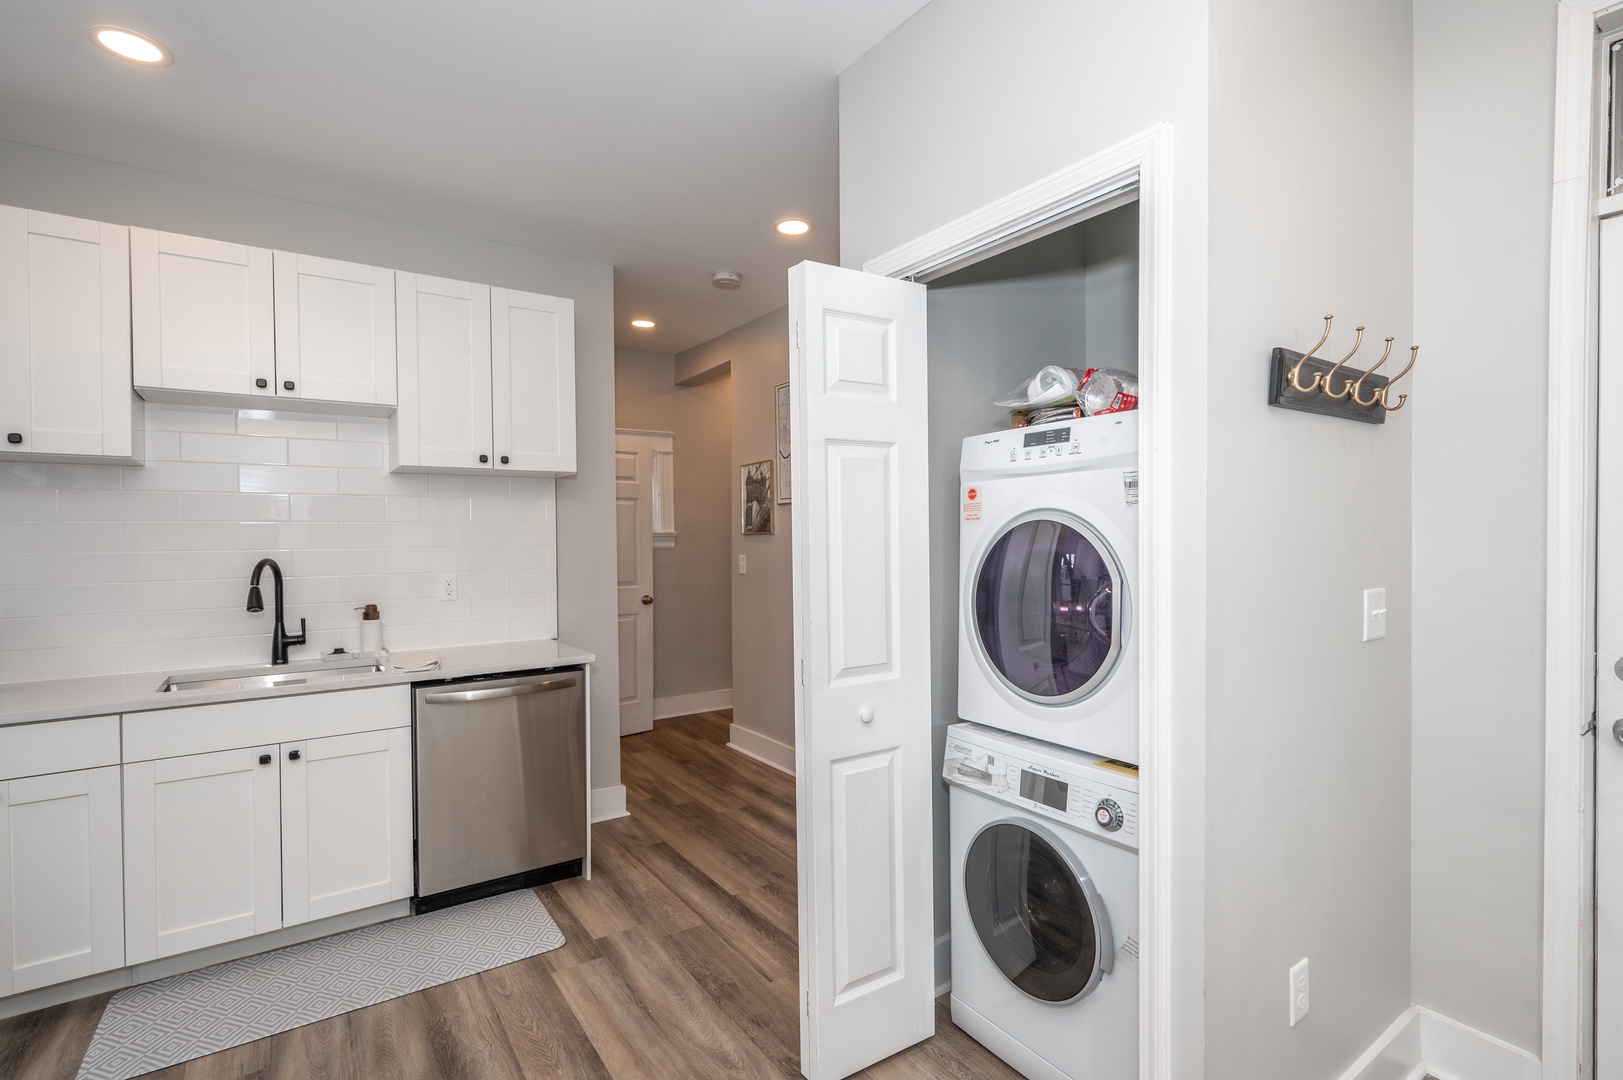 Apt 1 – Private laundry is conveniently tucked away in the kitchen